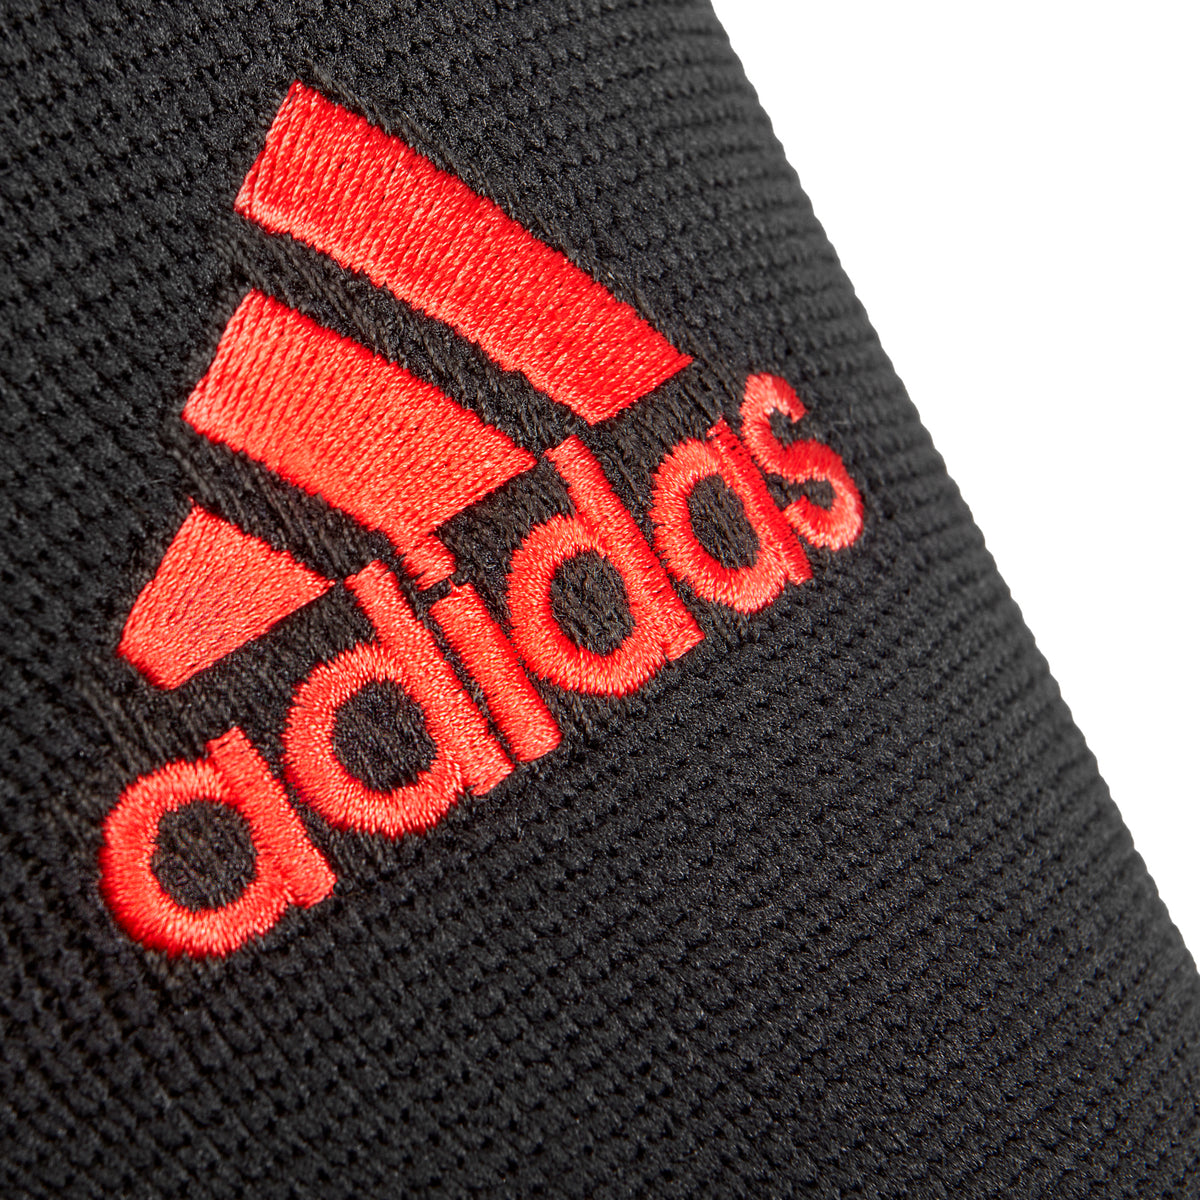 adidas Classic Elbow Support red logo closeup